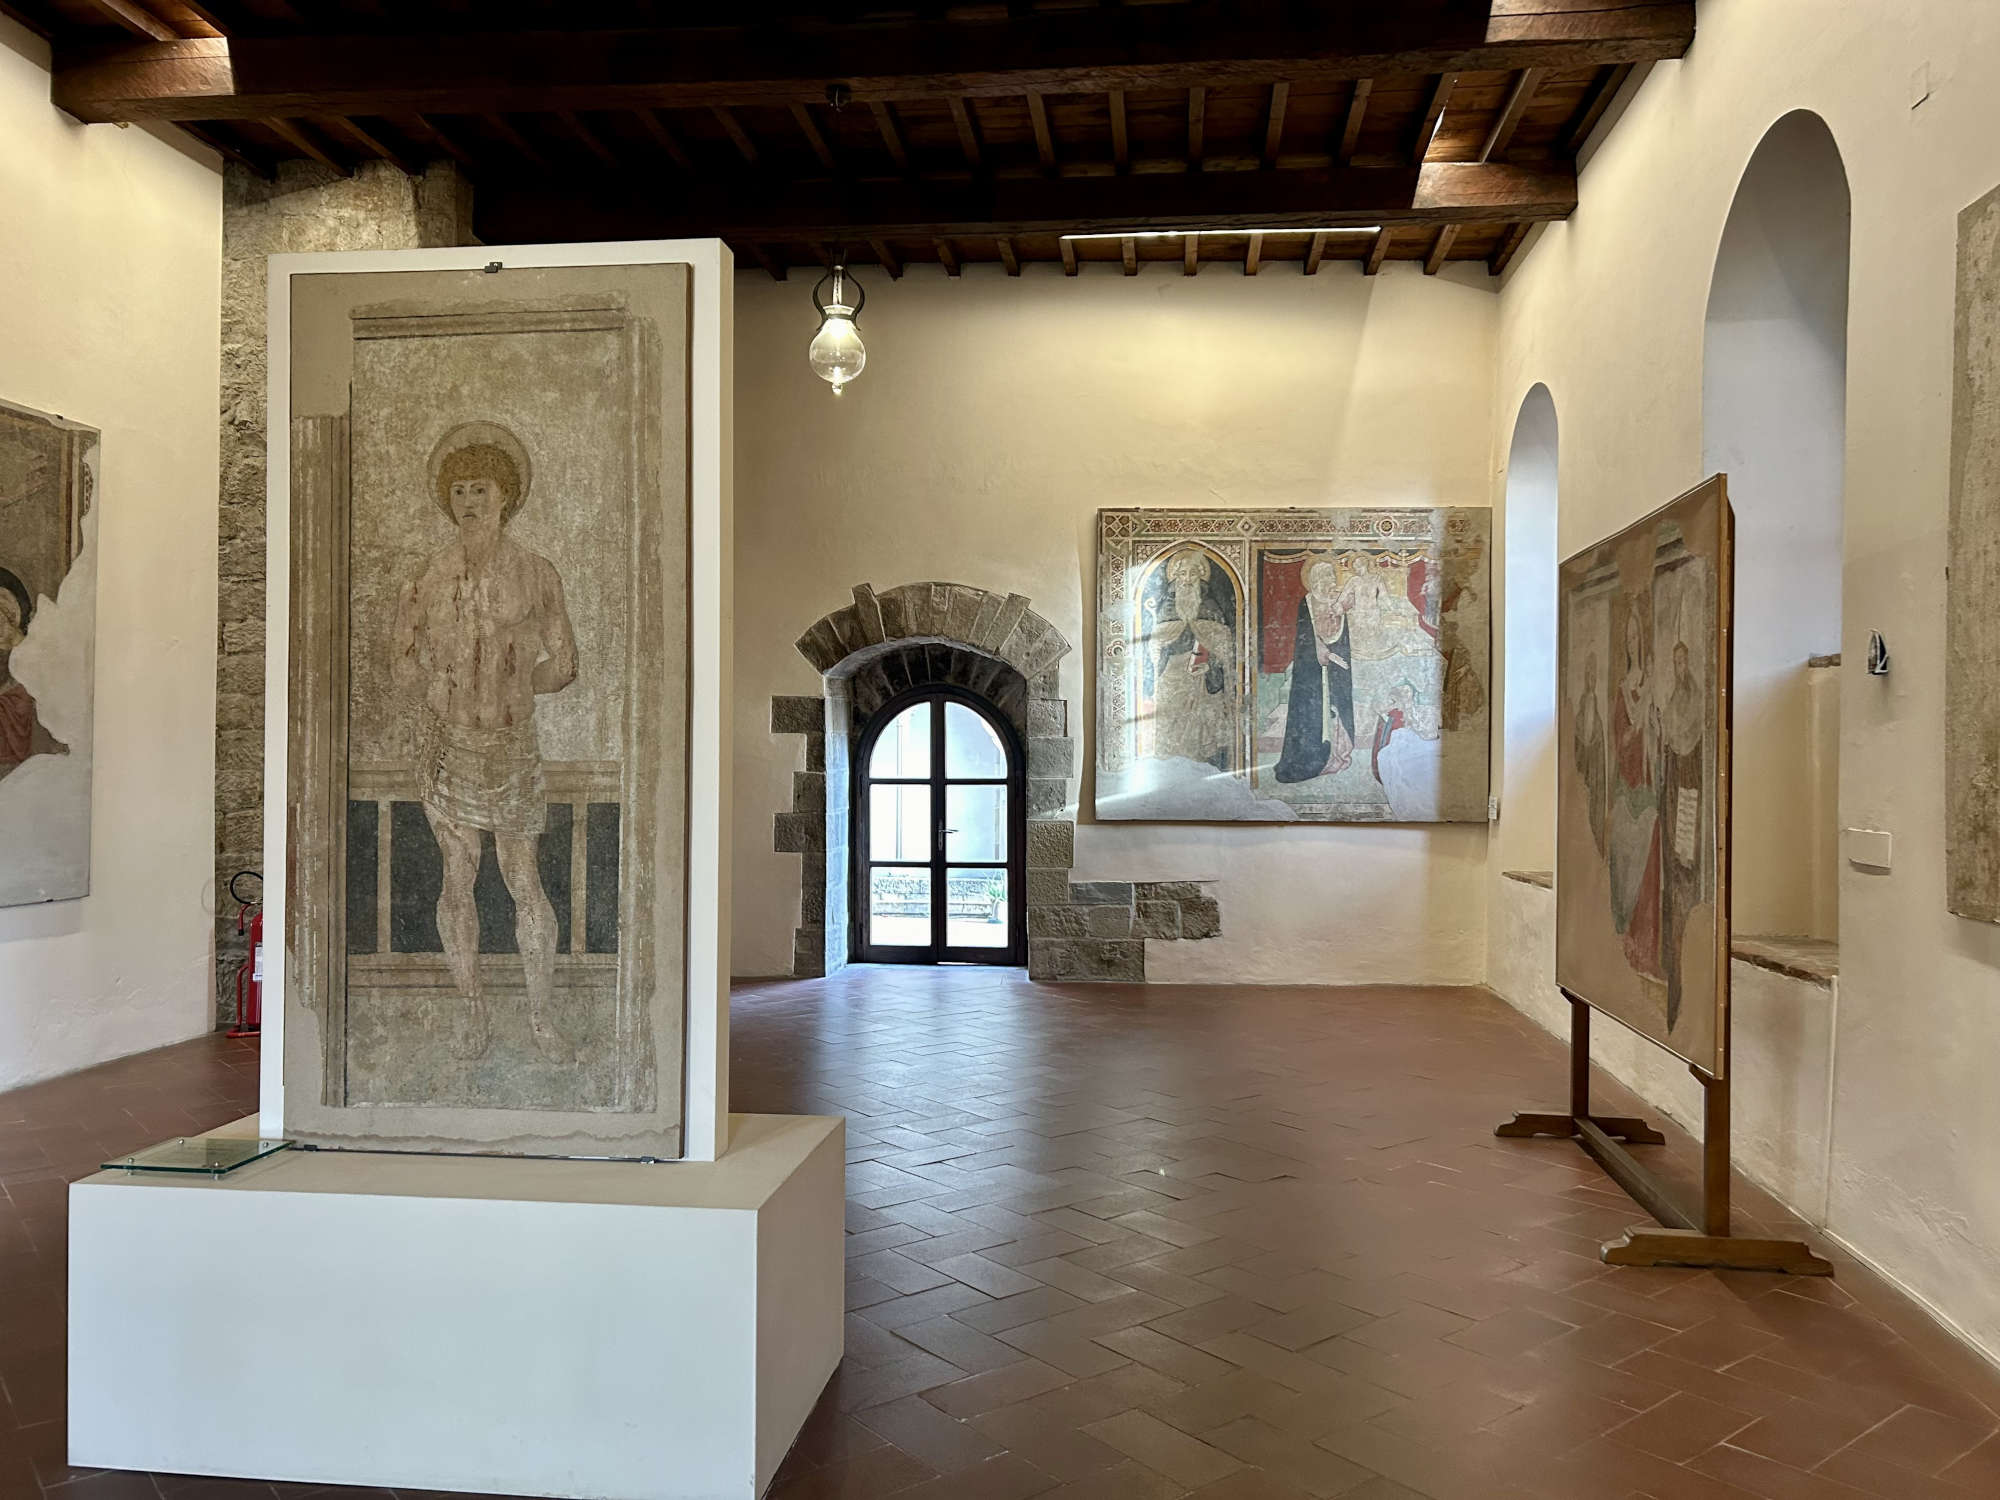 The museum room on the upper floor with frescoes and sinopites